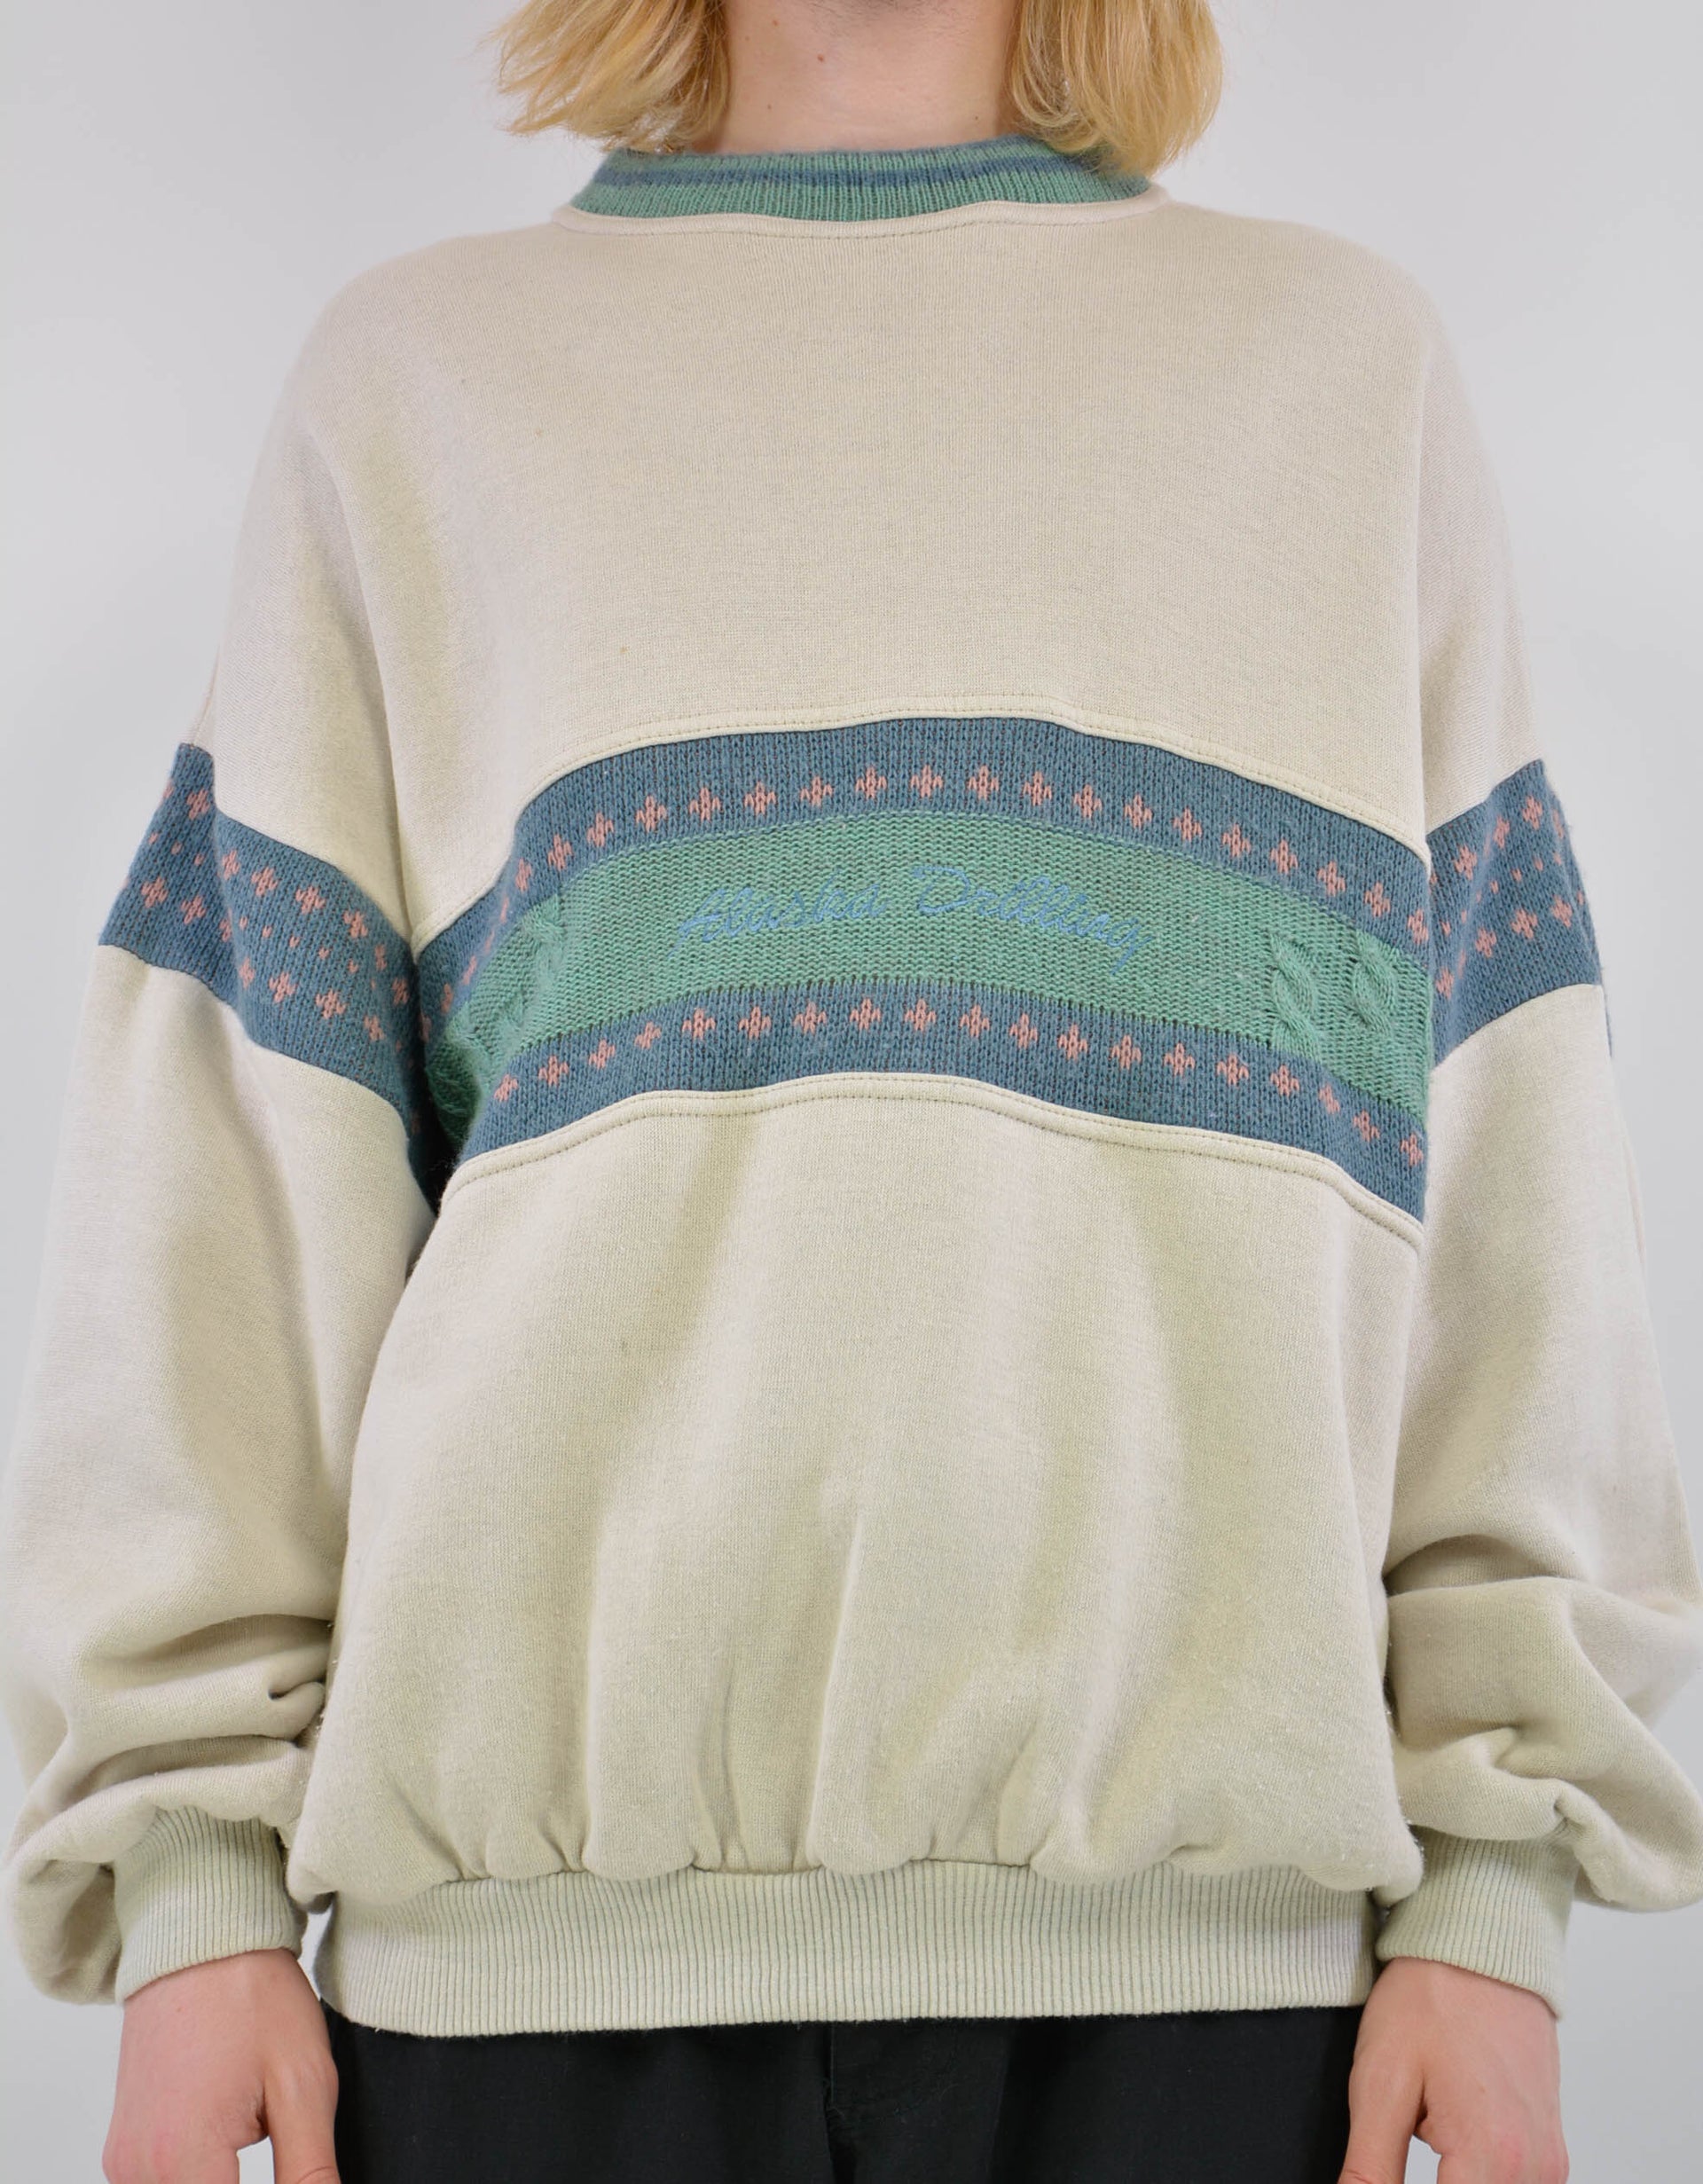 80s sweater - PICKNWEIGHT - VINTAGE KILO STORE